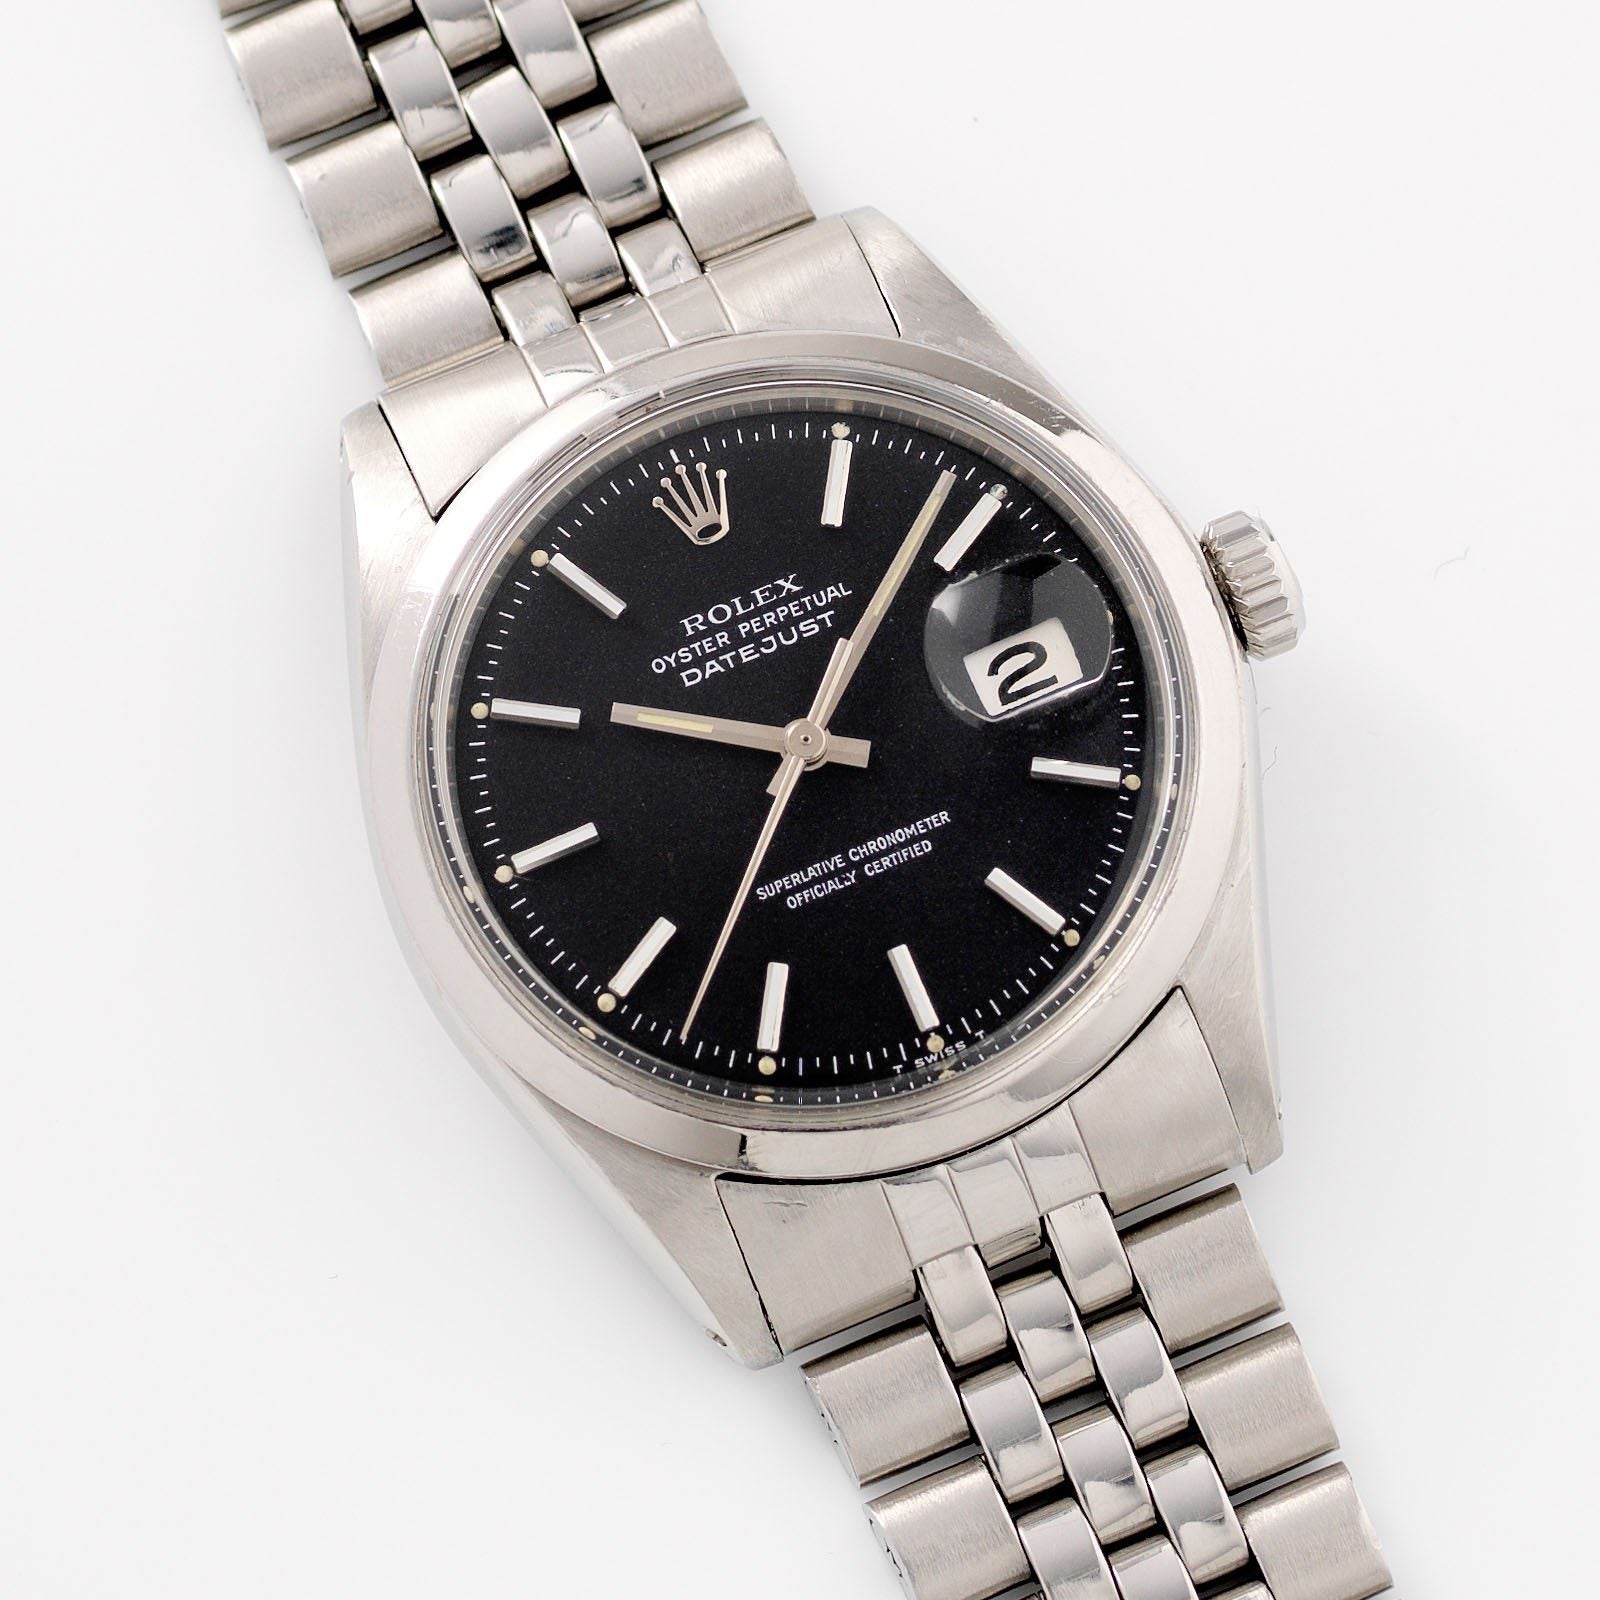 Rolex Datejust Reference Black Marble Dial 1600 